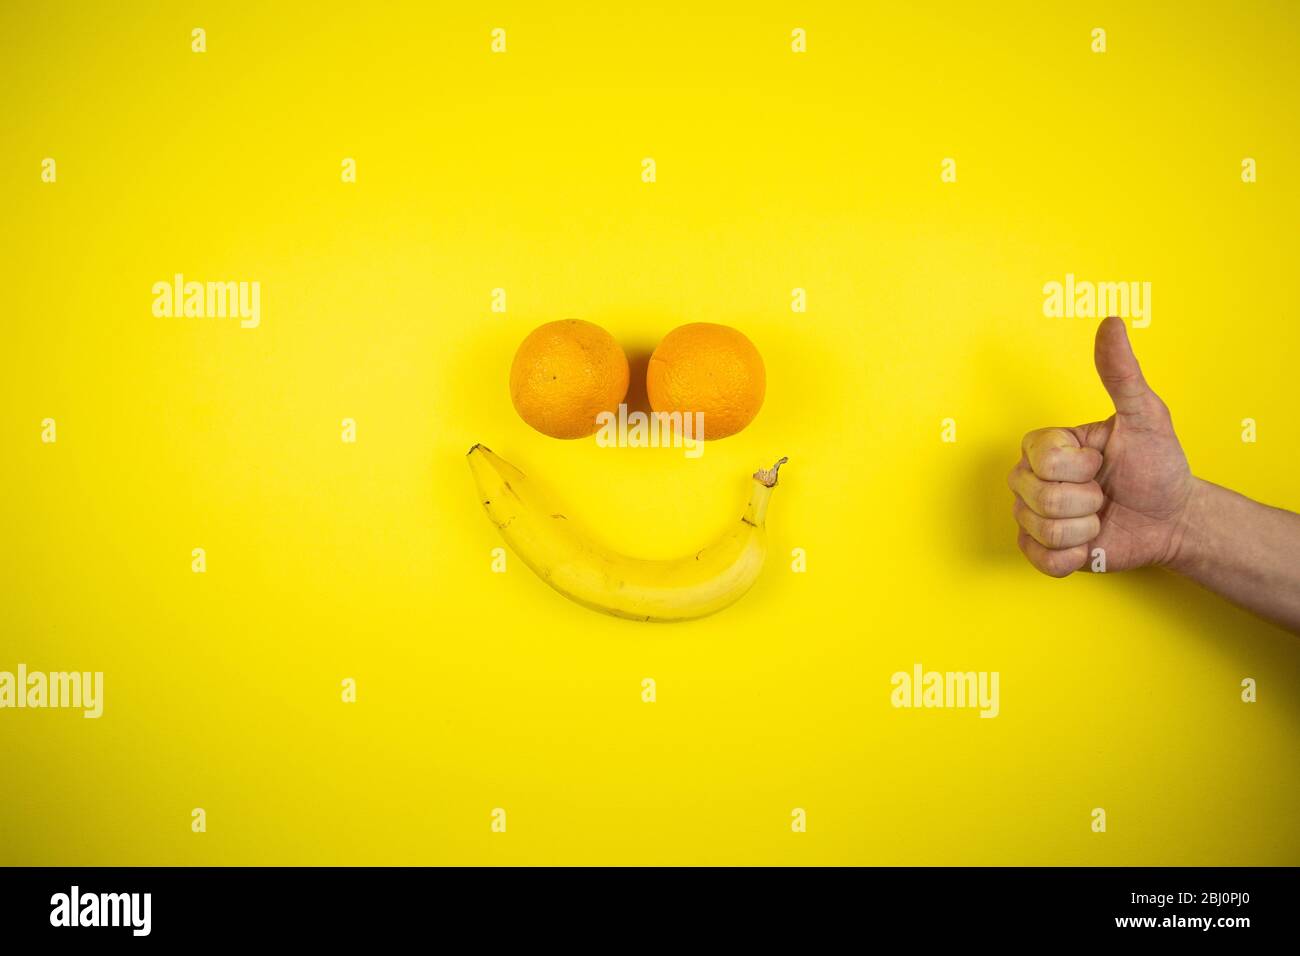 banana and oranges in the form of a smile Stock Photo